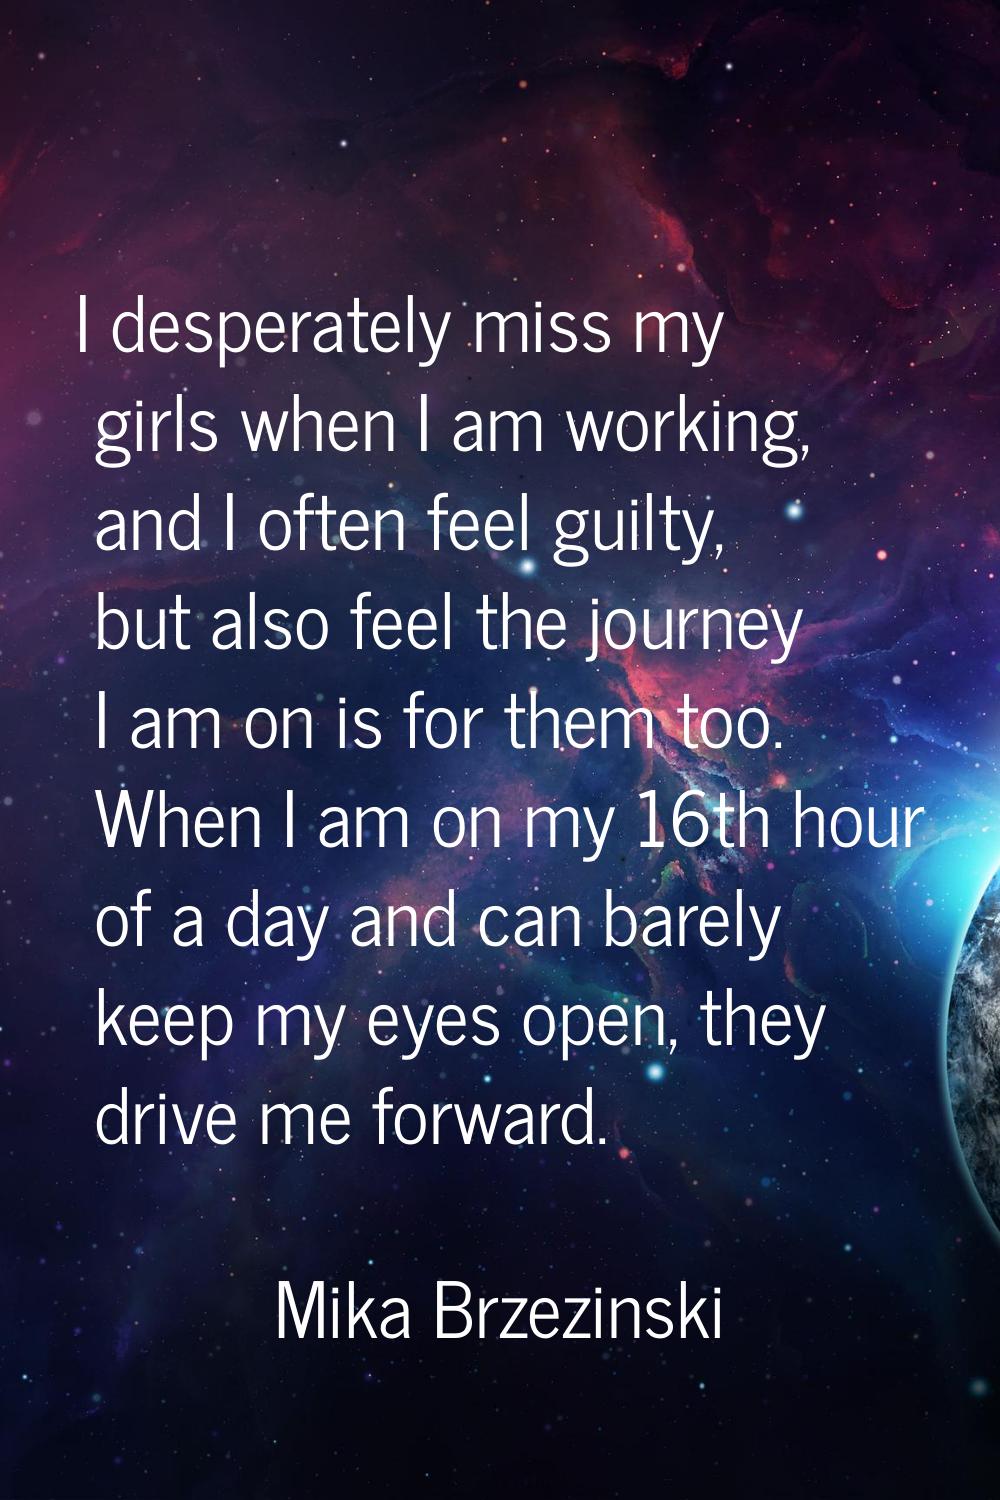 I desperately miss my girls when I am working, and I often feel guilty, but also feel the journey I